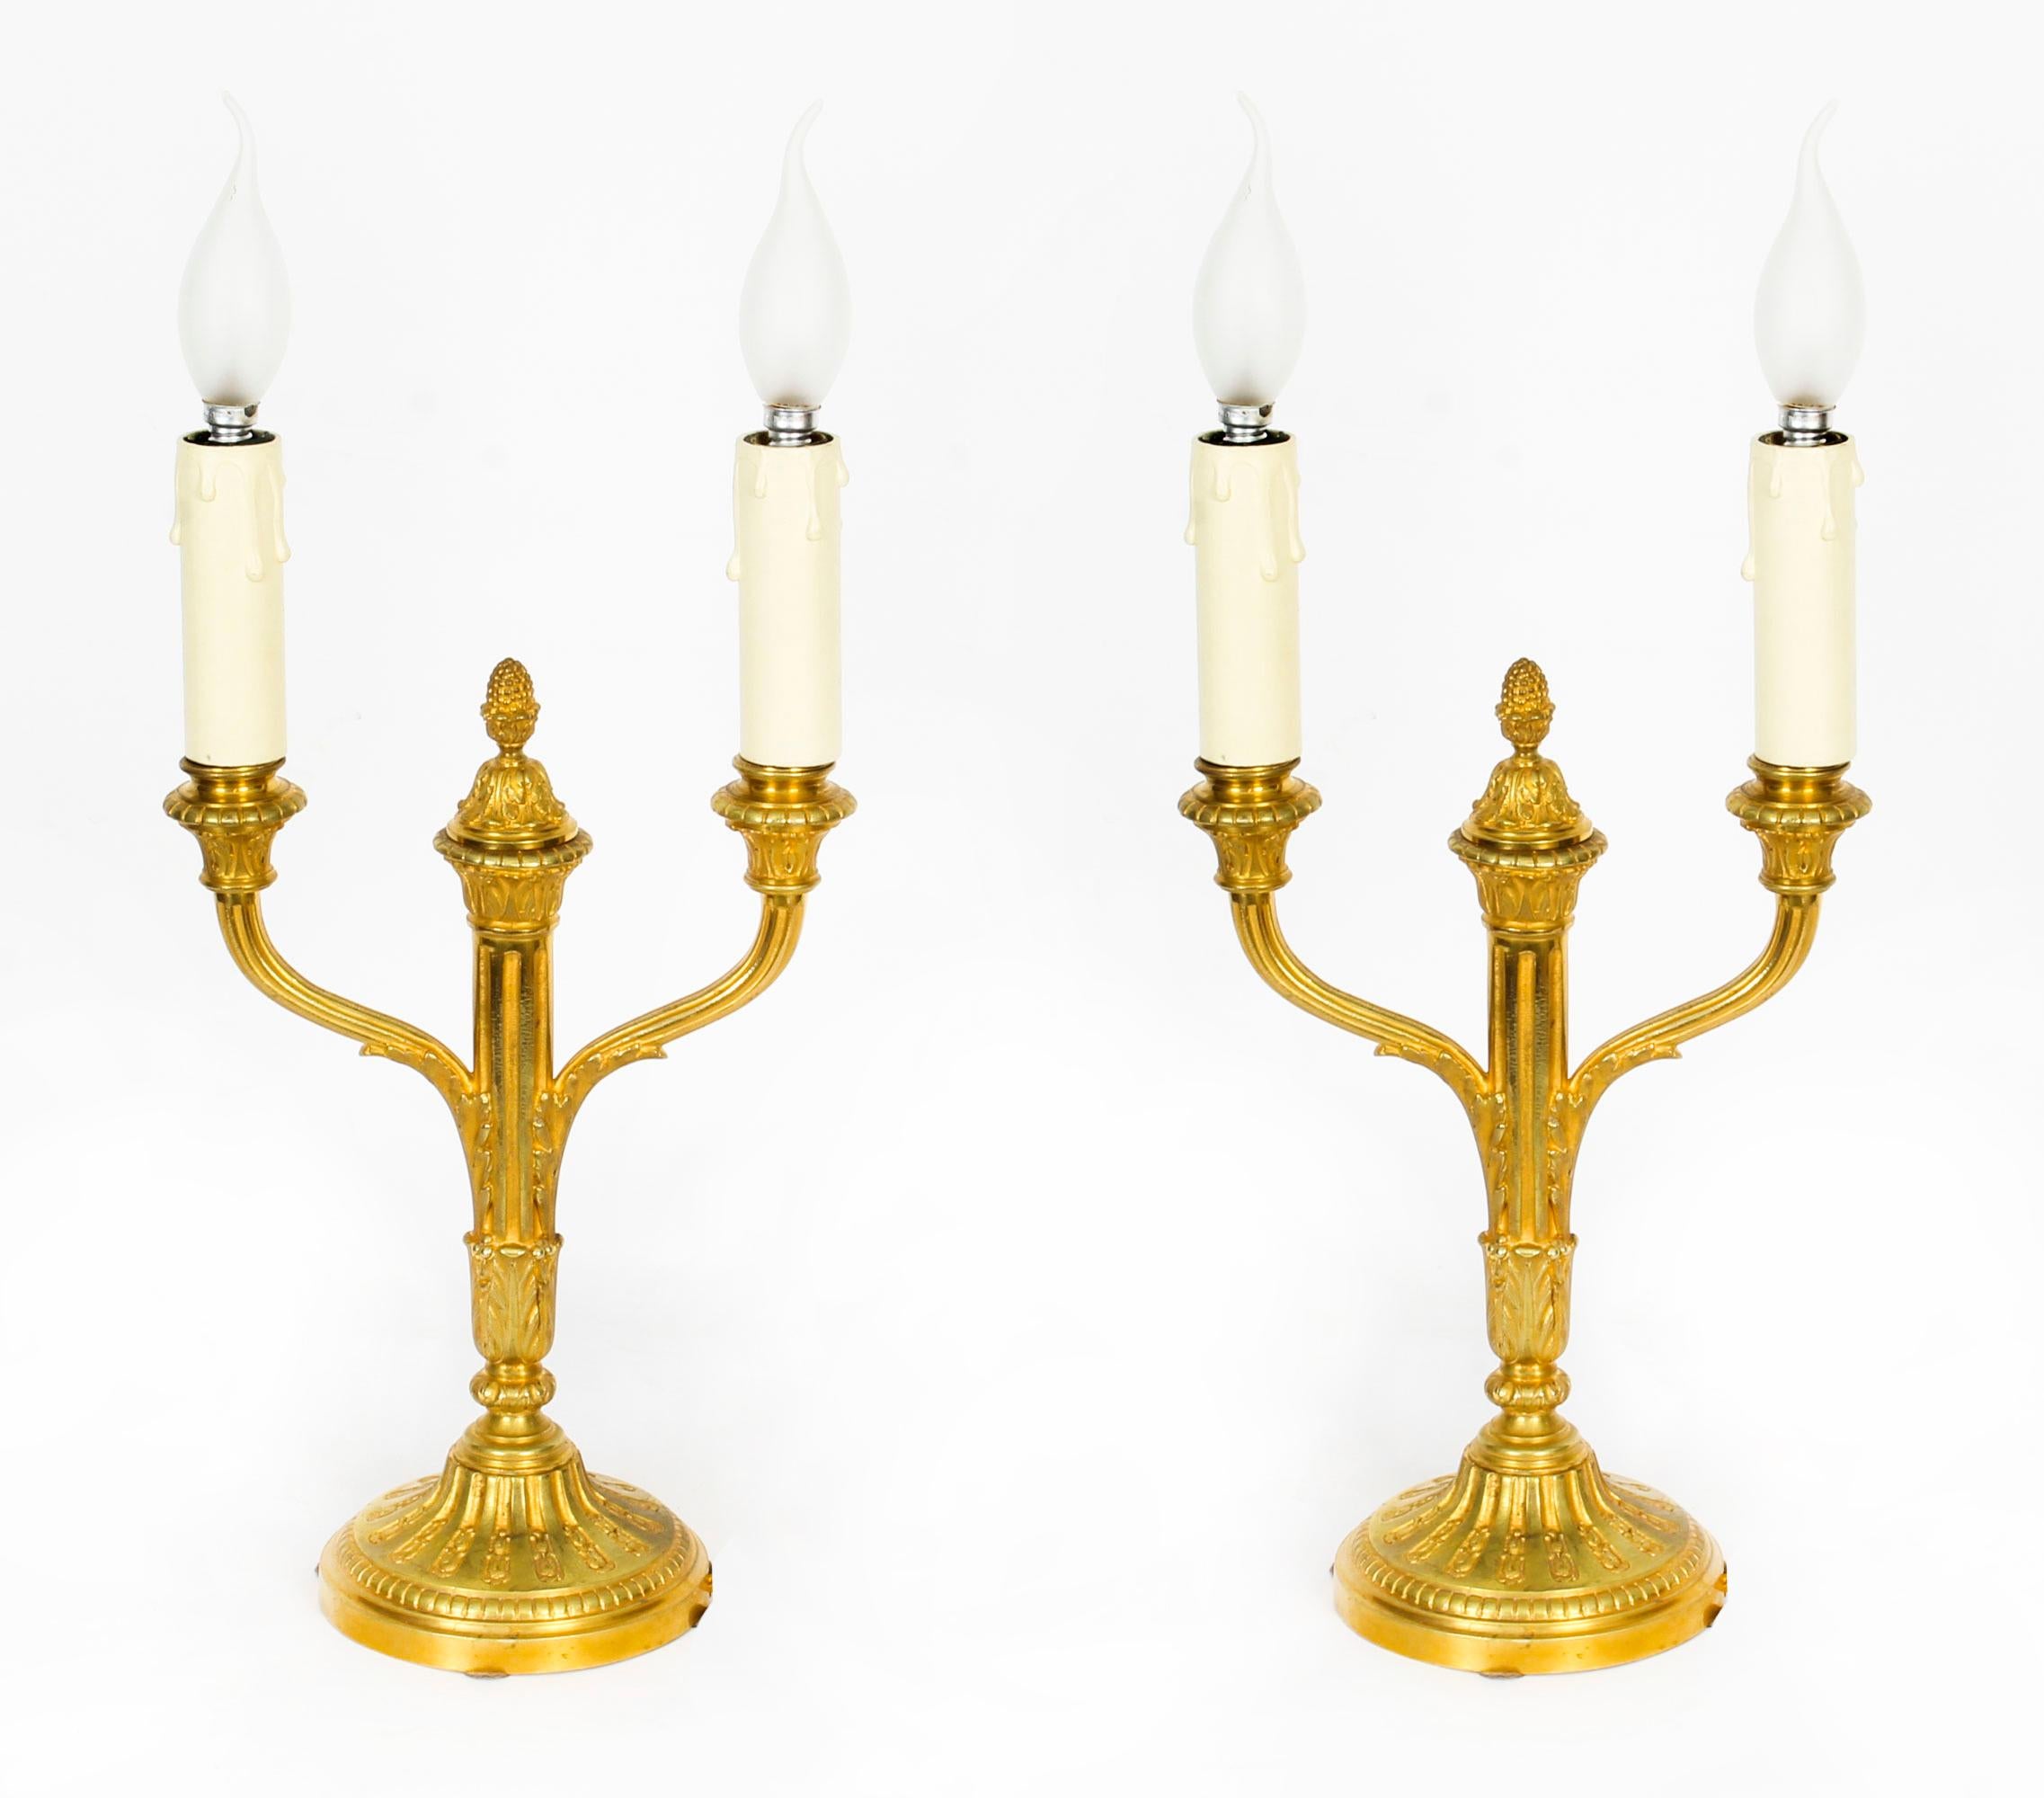 Antique Pair of French Neoclassical Ormolu Candelabra Table Lamps, 19th Century 7